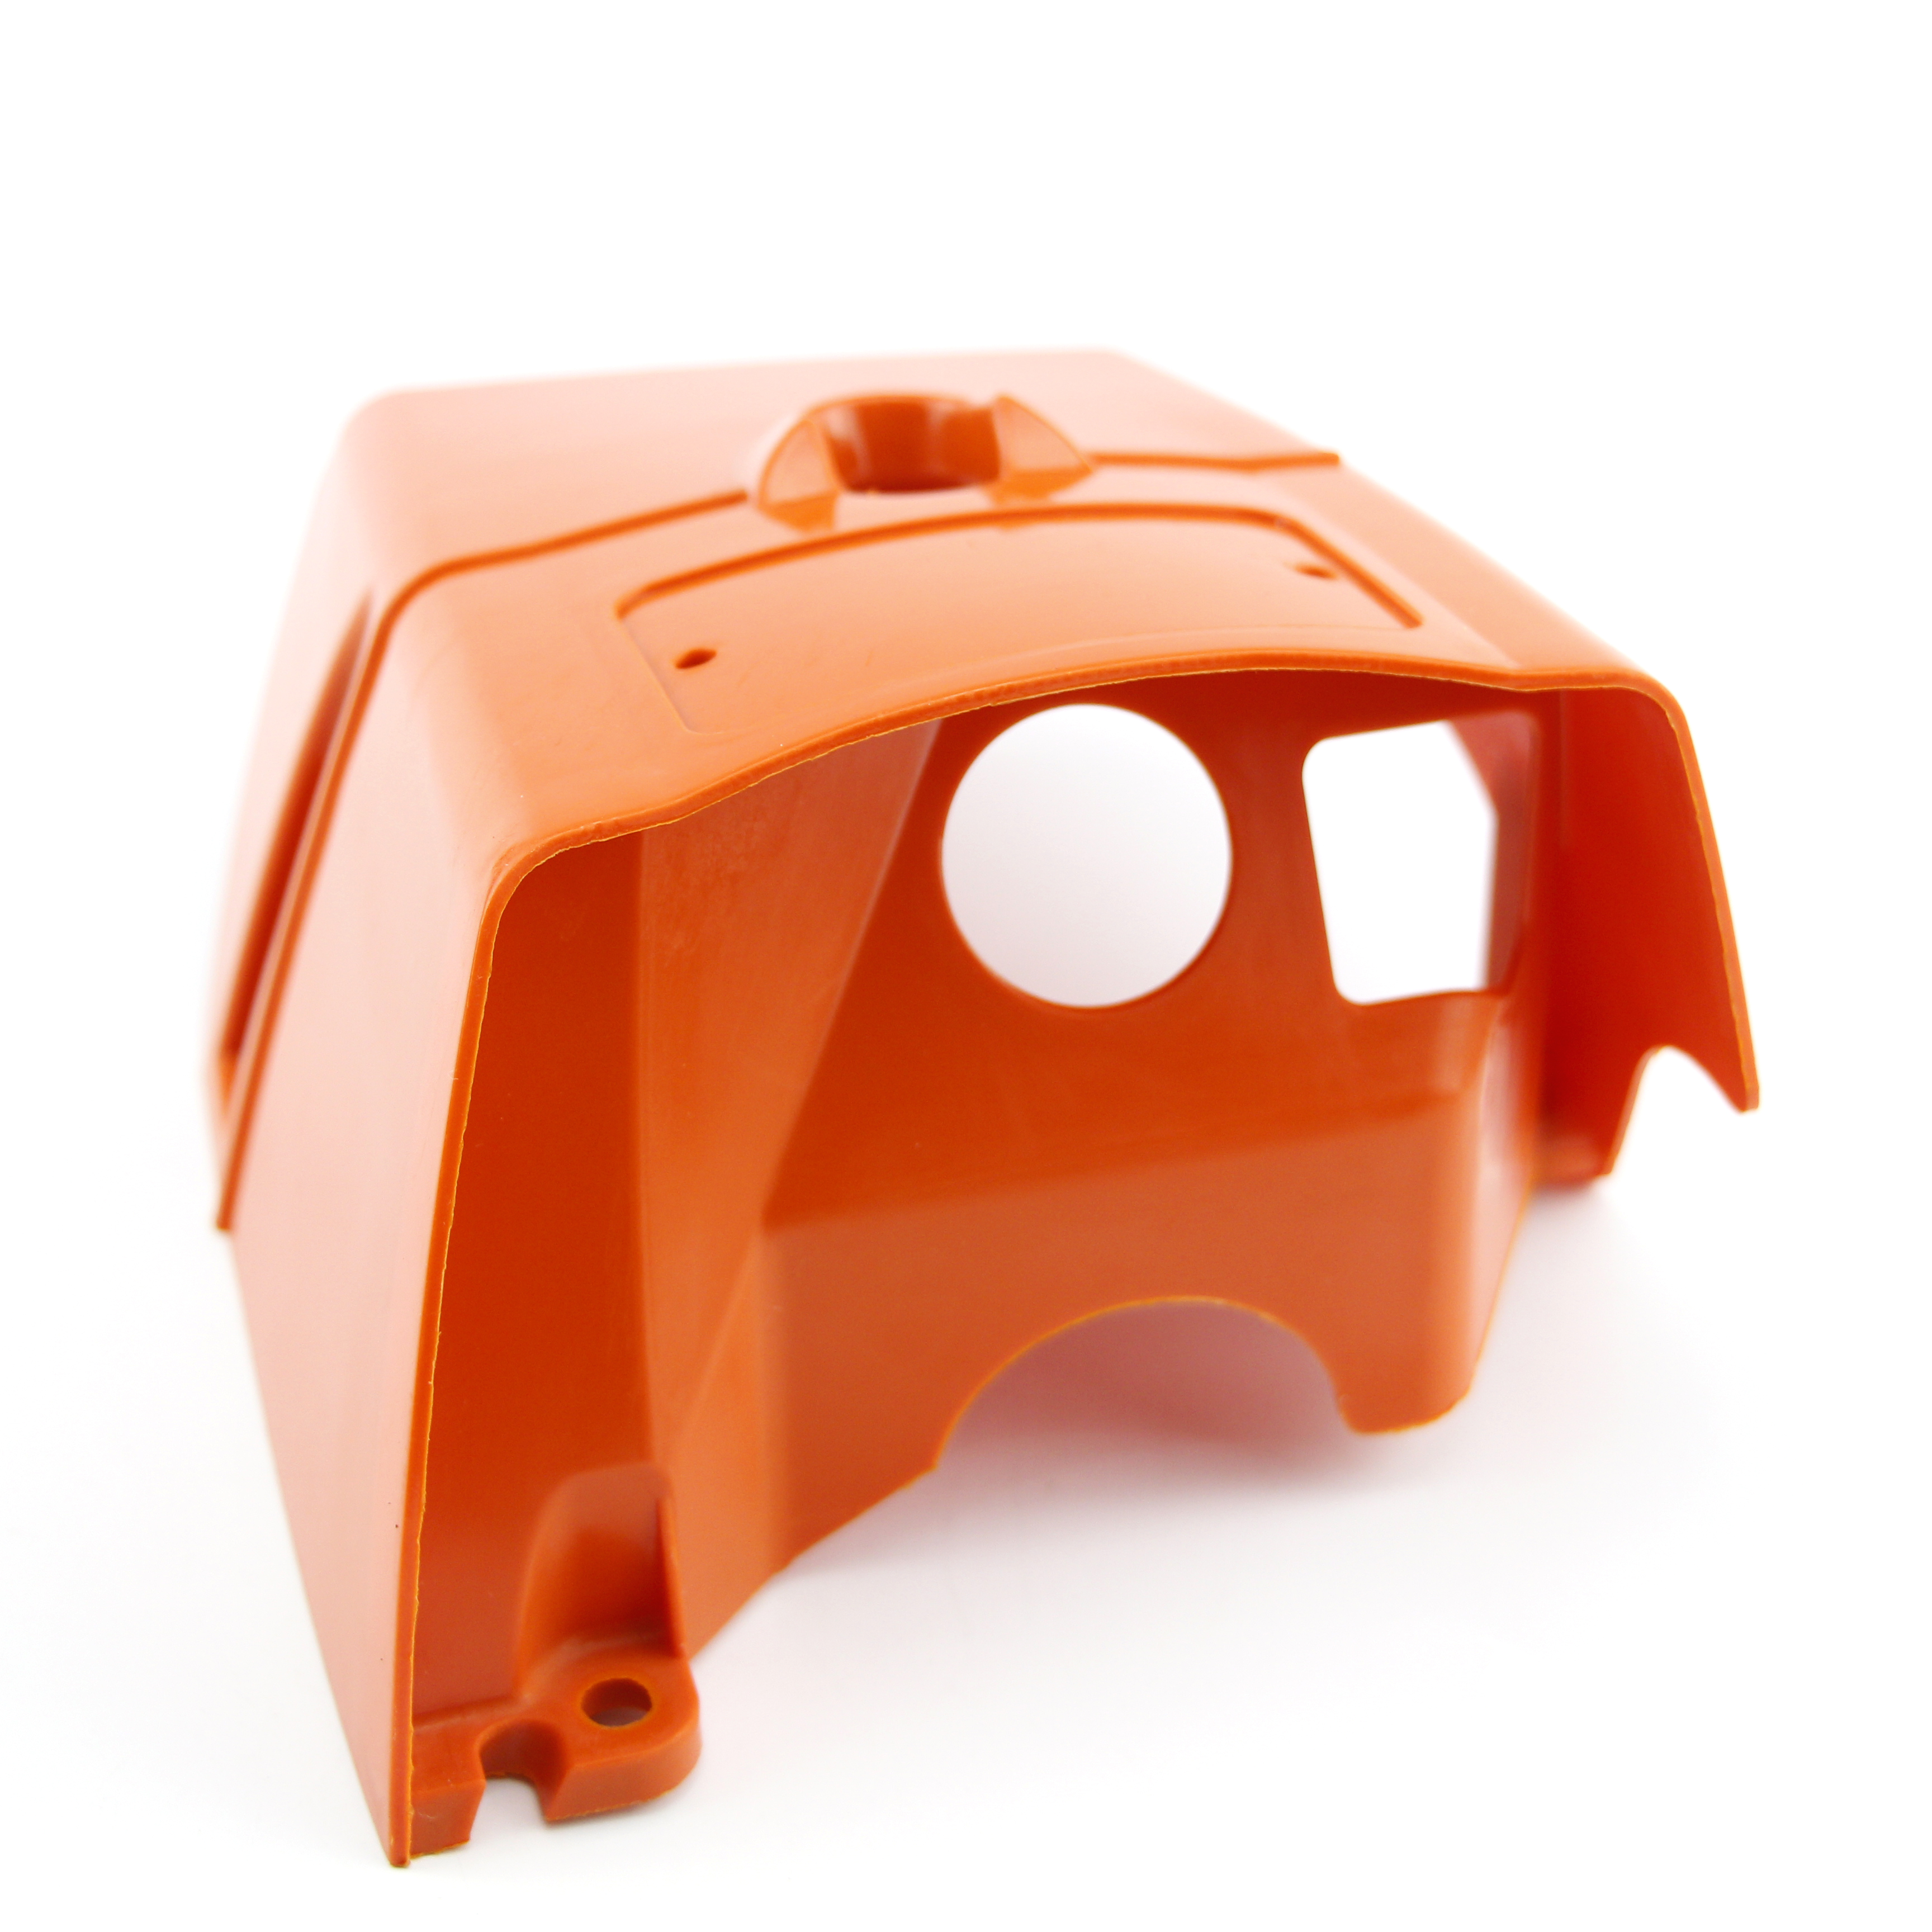 Shroud Top Cylinder Cover For Stihl 065 066 MS650 MS660 Chainsaw 1122 080 1604